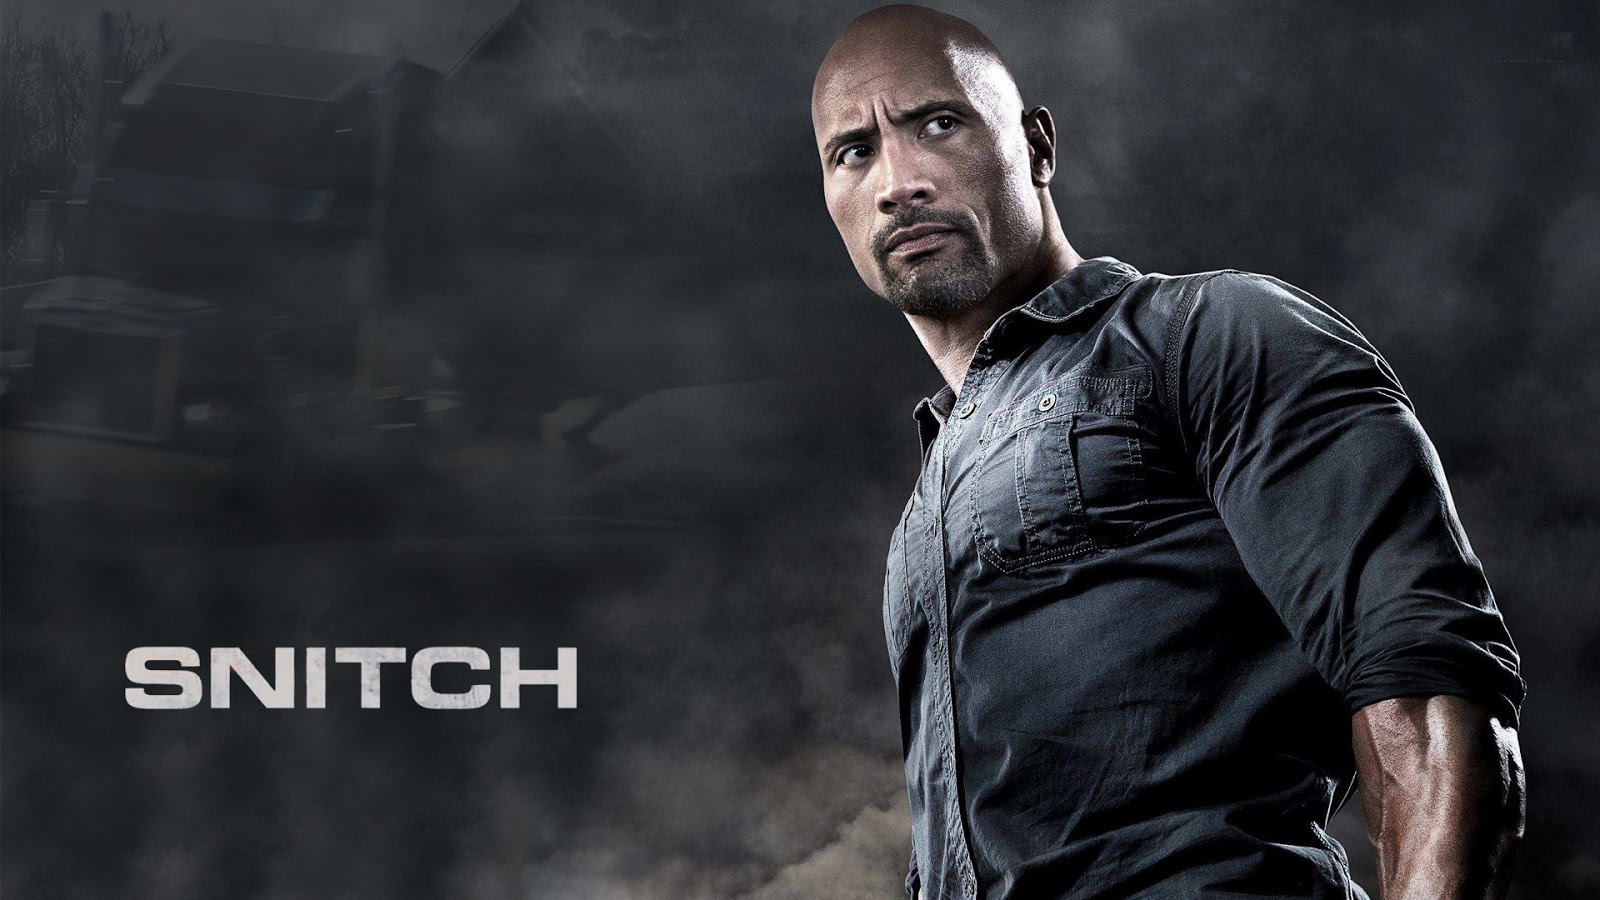 dwayne johnson hd wallpapers,movie,font,muscle,poster,action film